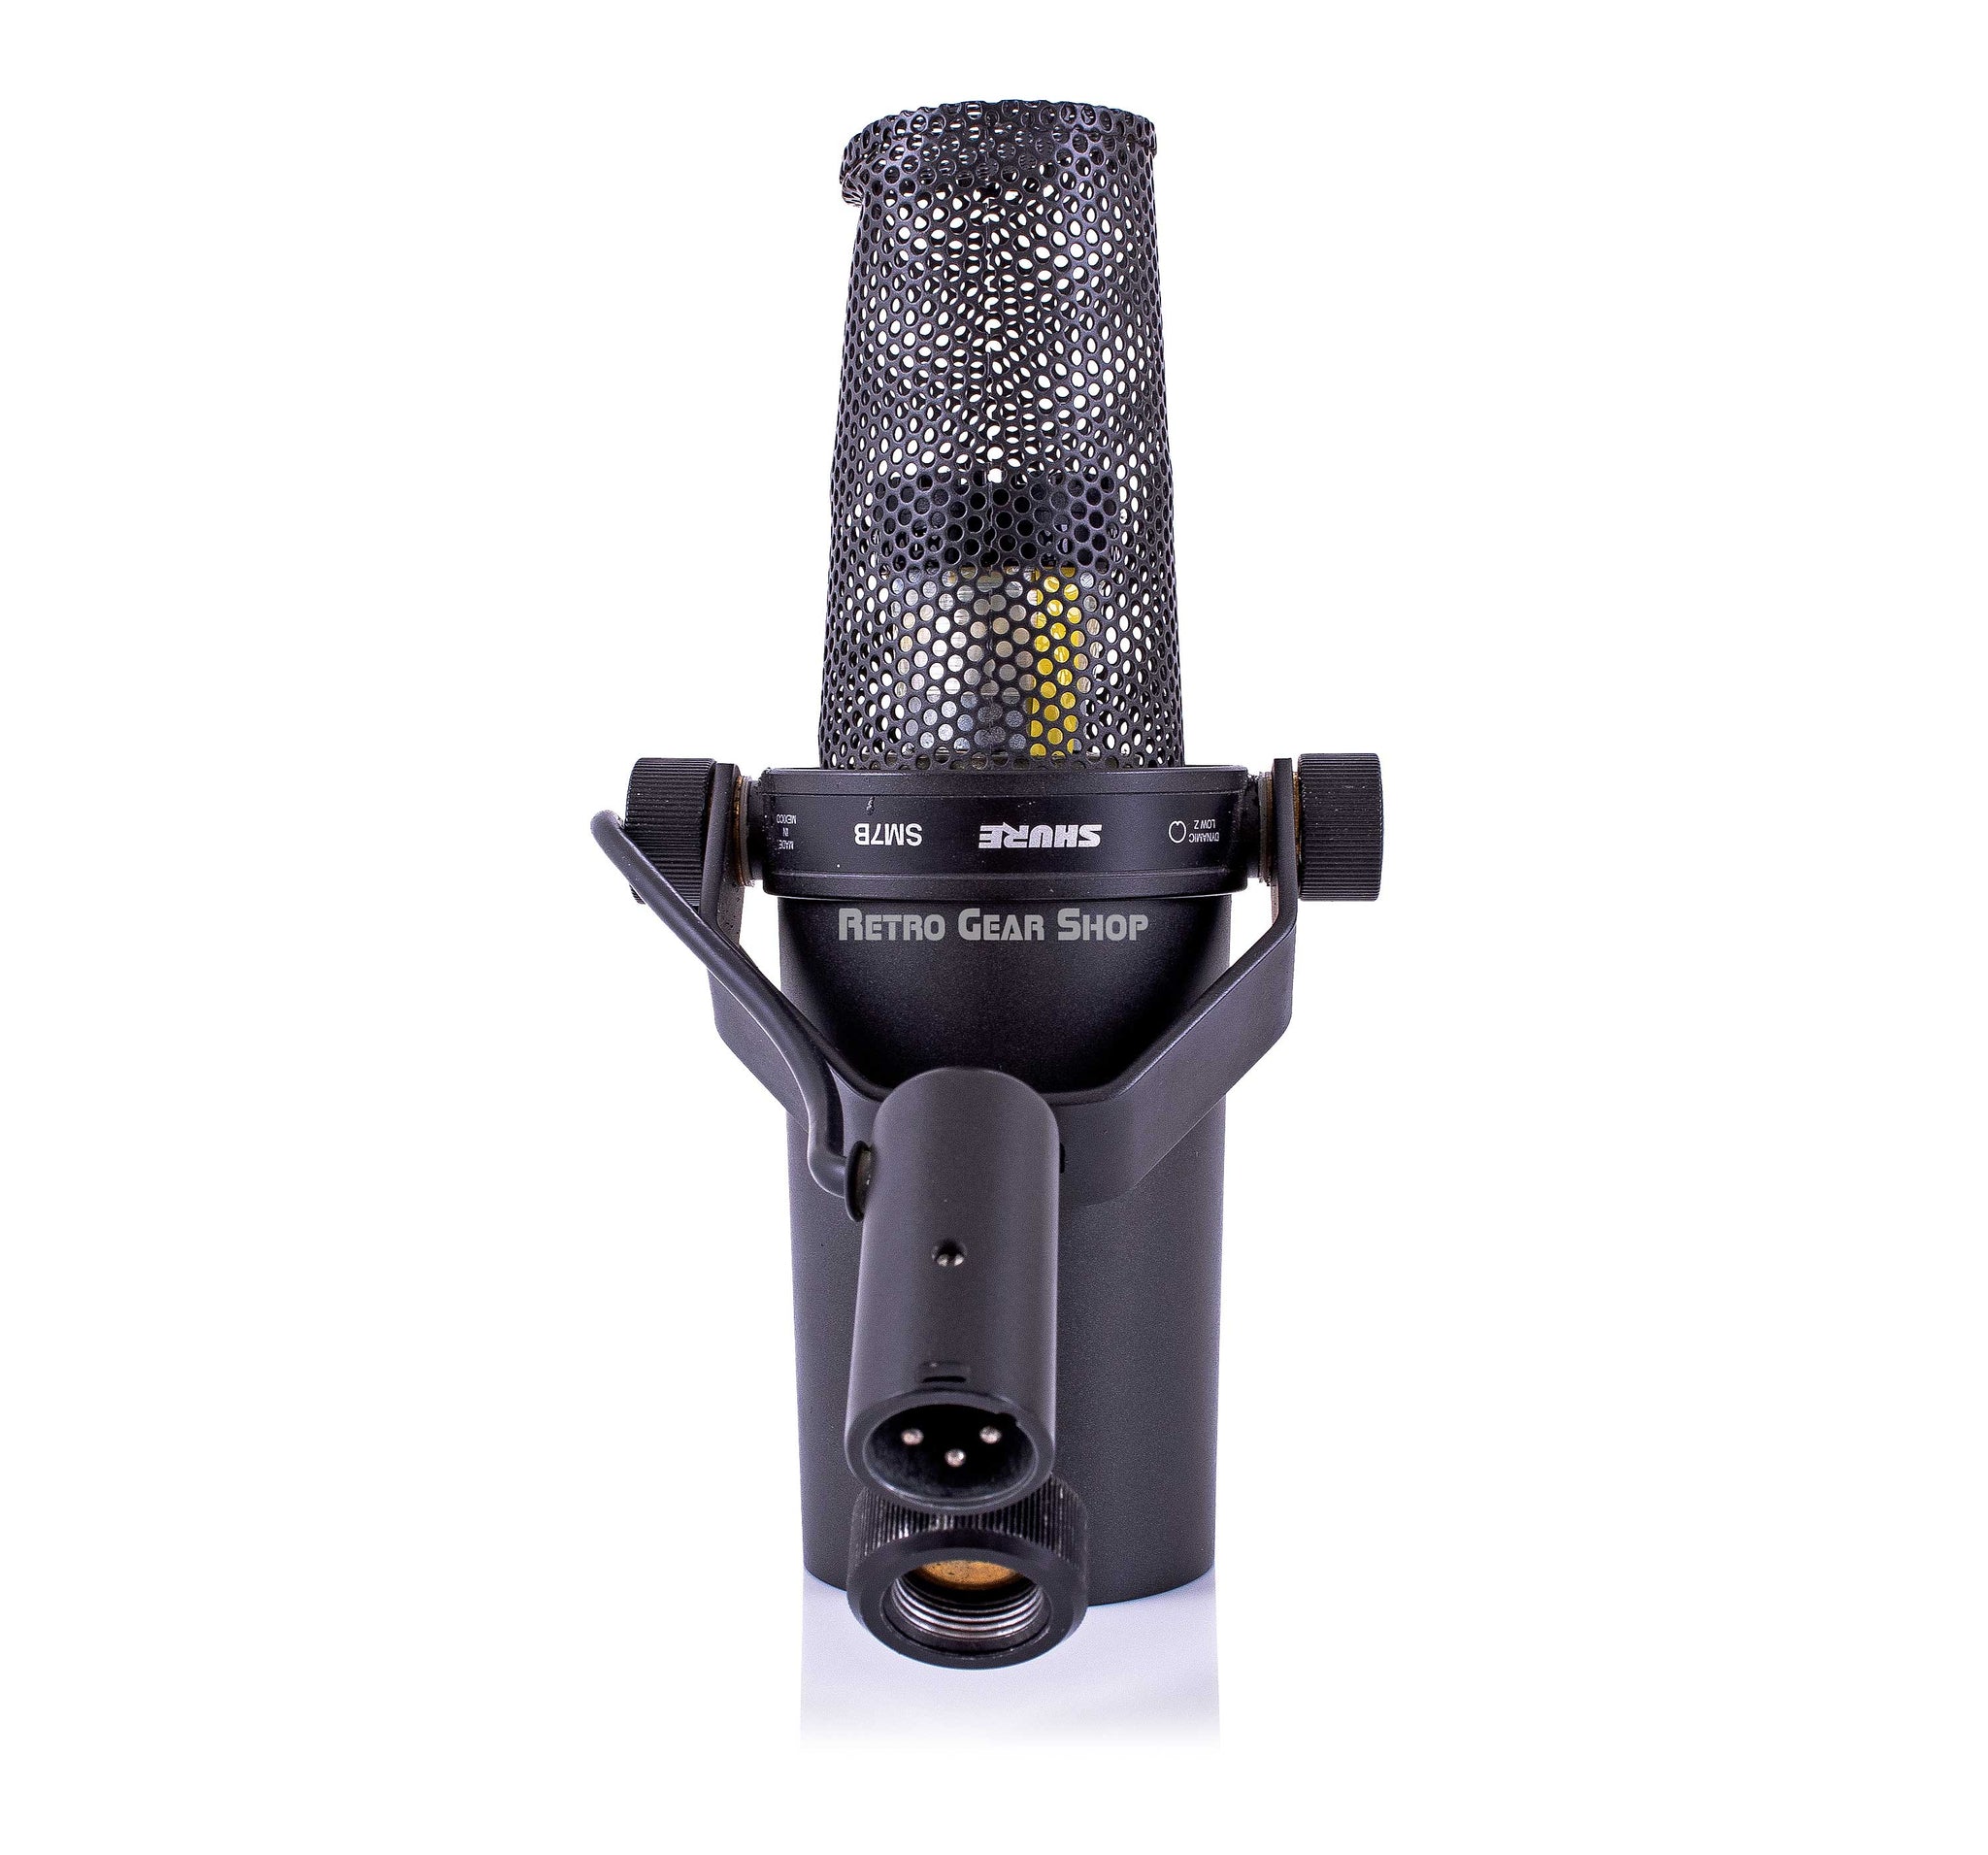 Shure SM7 Front